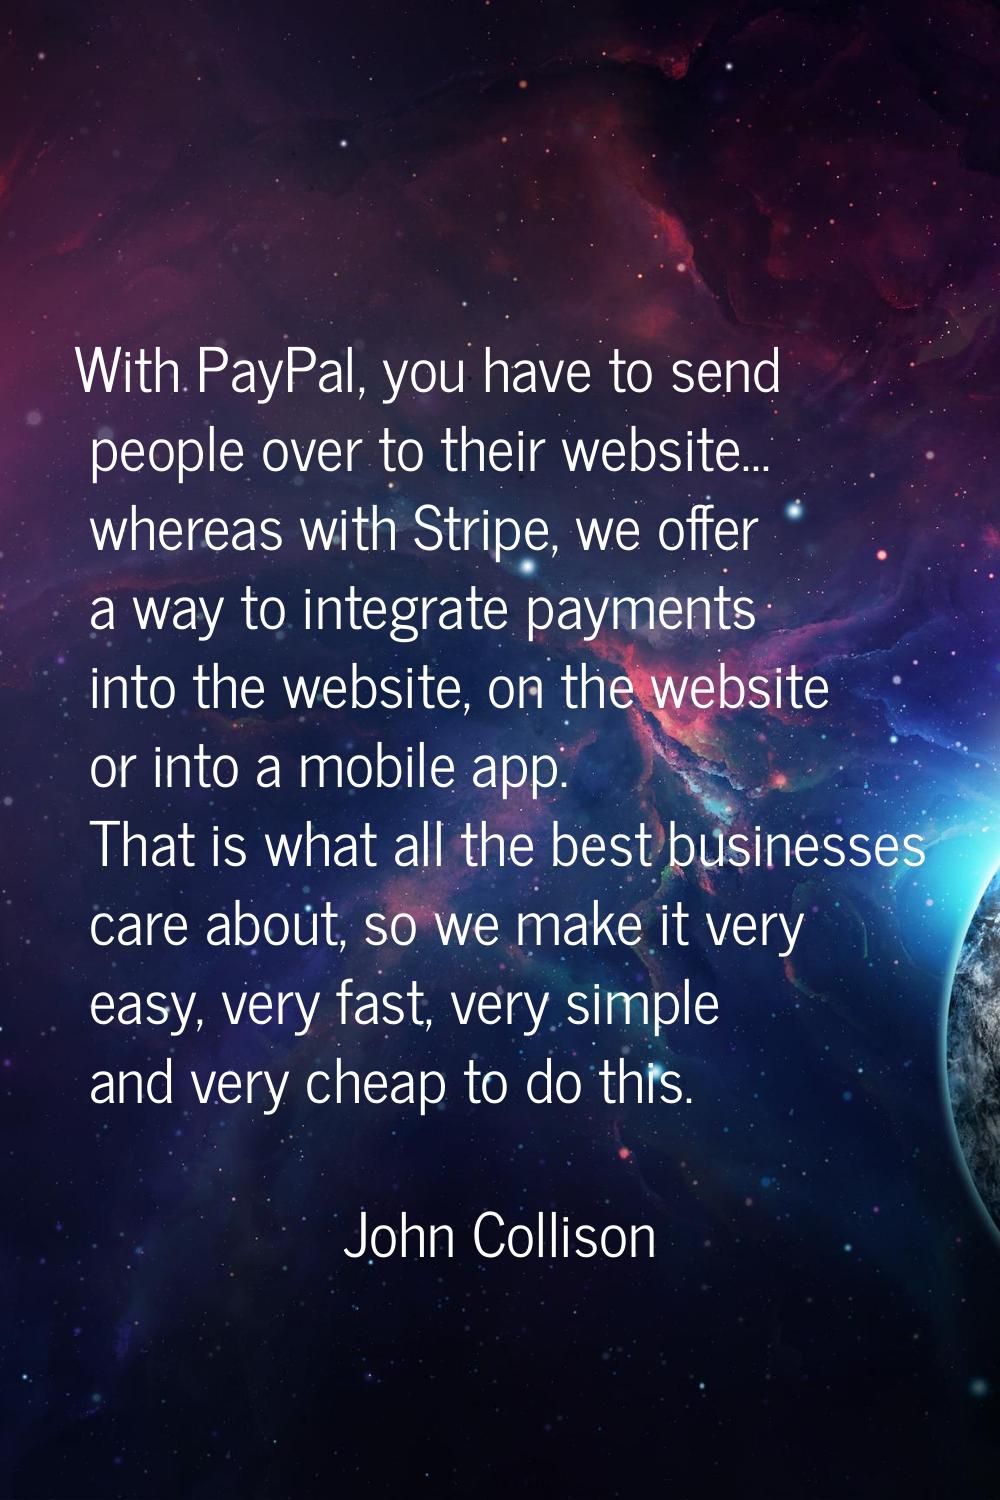 With PayPal, you have to send people over to their website... whereas with Stripe, we offer a way t